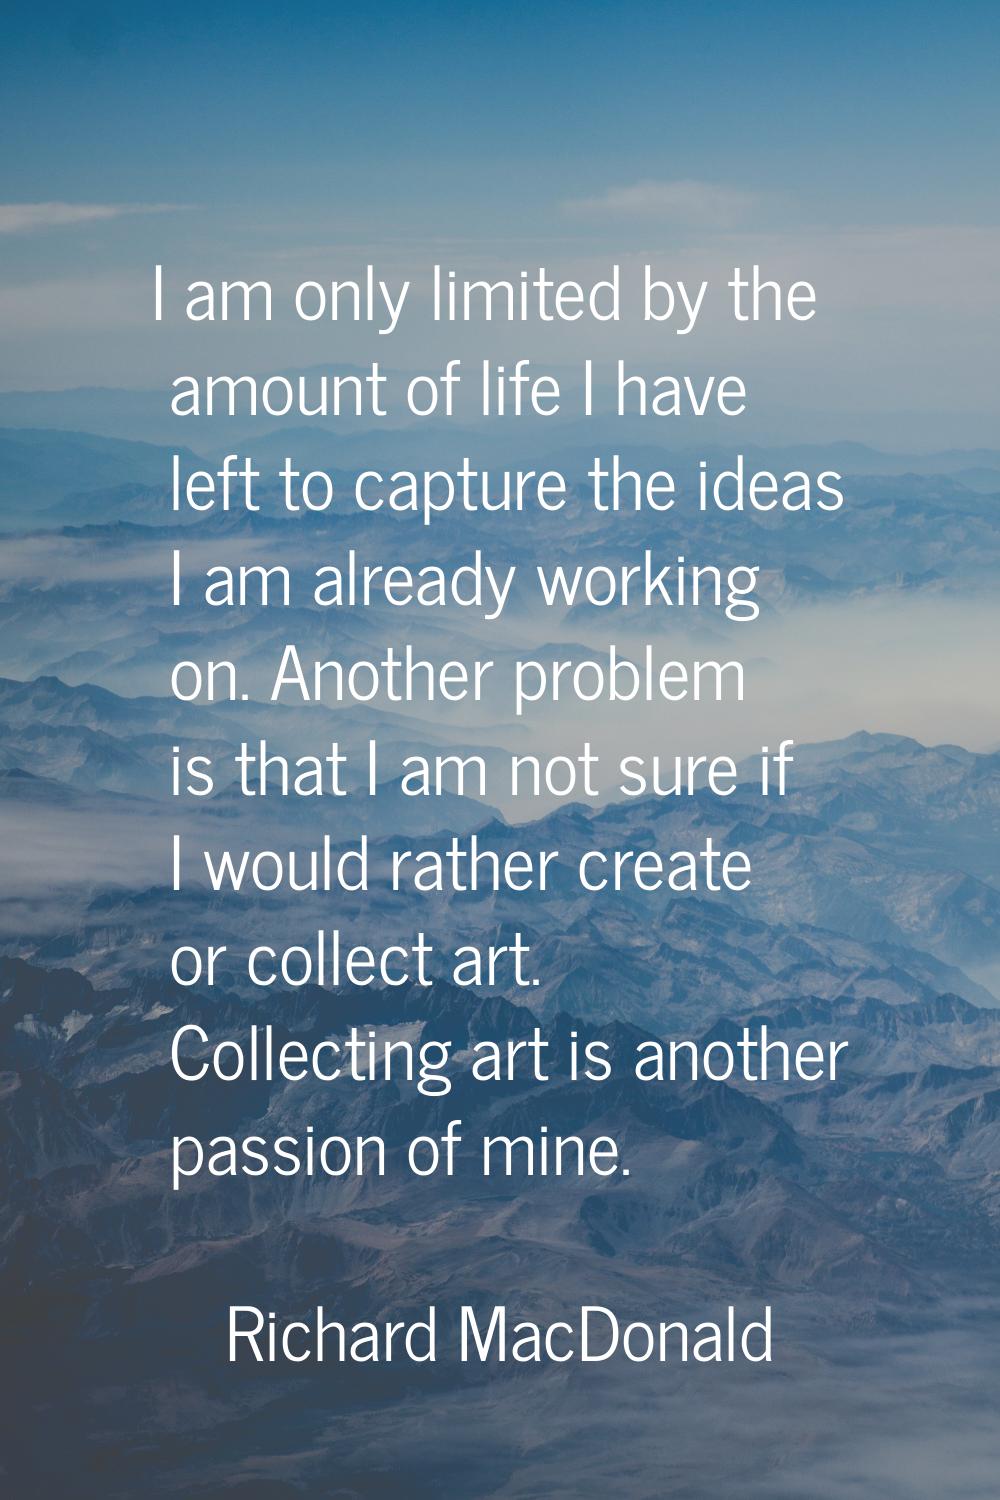 I am only limited by the amount of life I have left to capture the ideas I am already working on. A